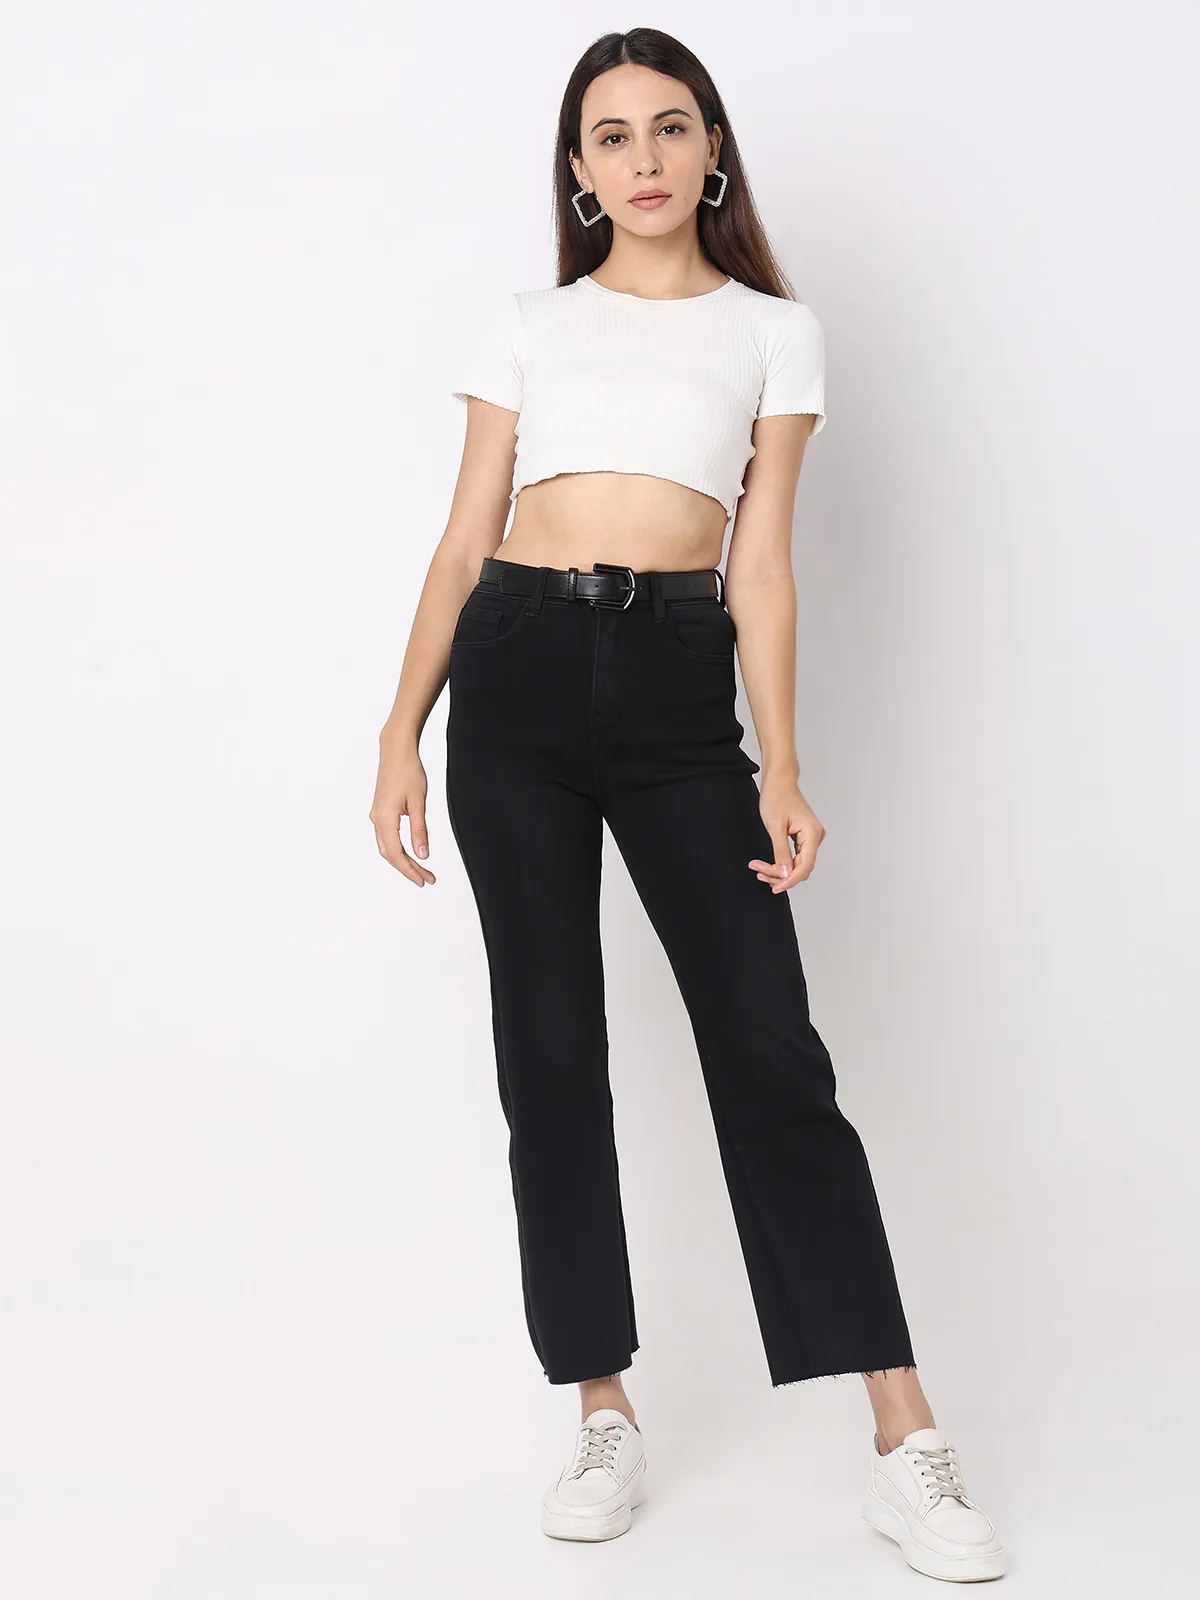 DEAL classy black solid jeans